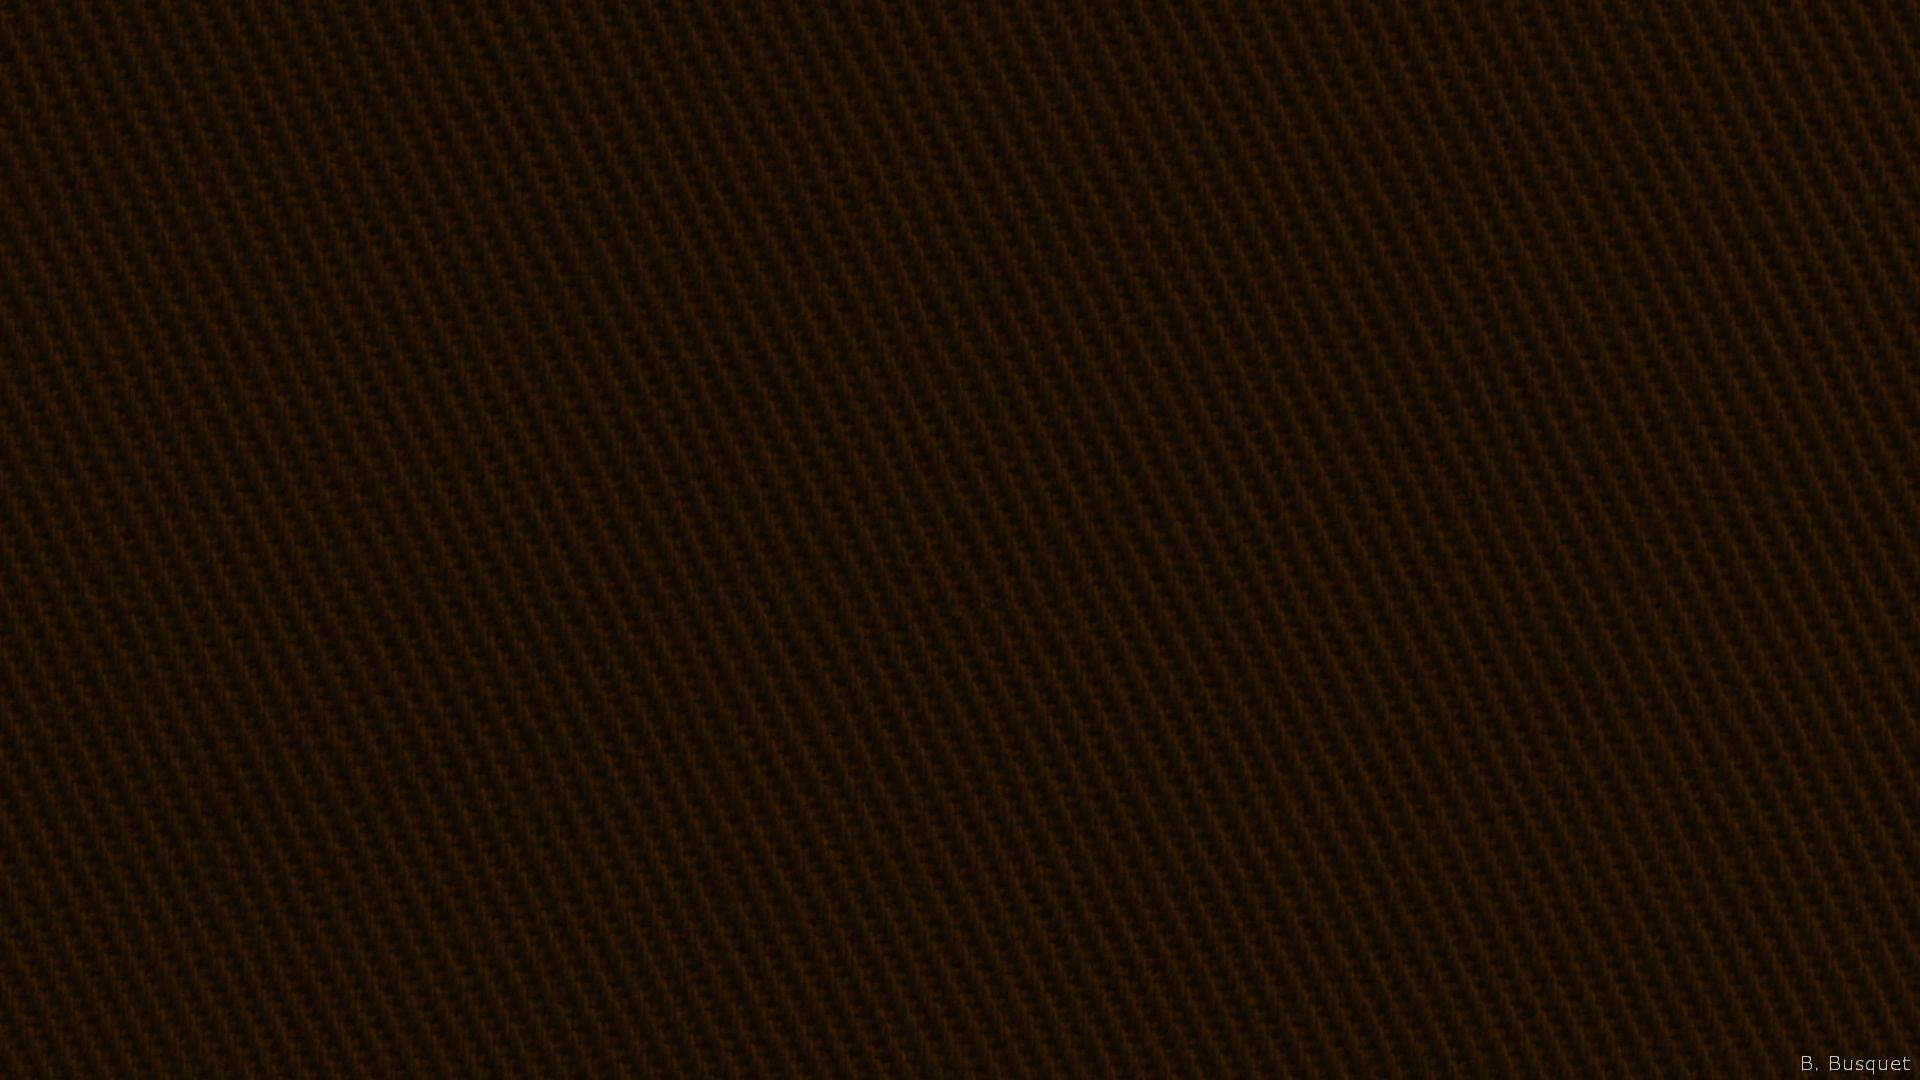 Black and Brown Wallpapers - Top Free Black and Brown Backgrounds